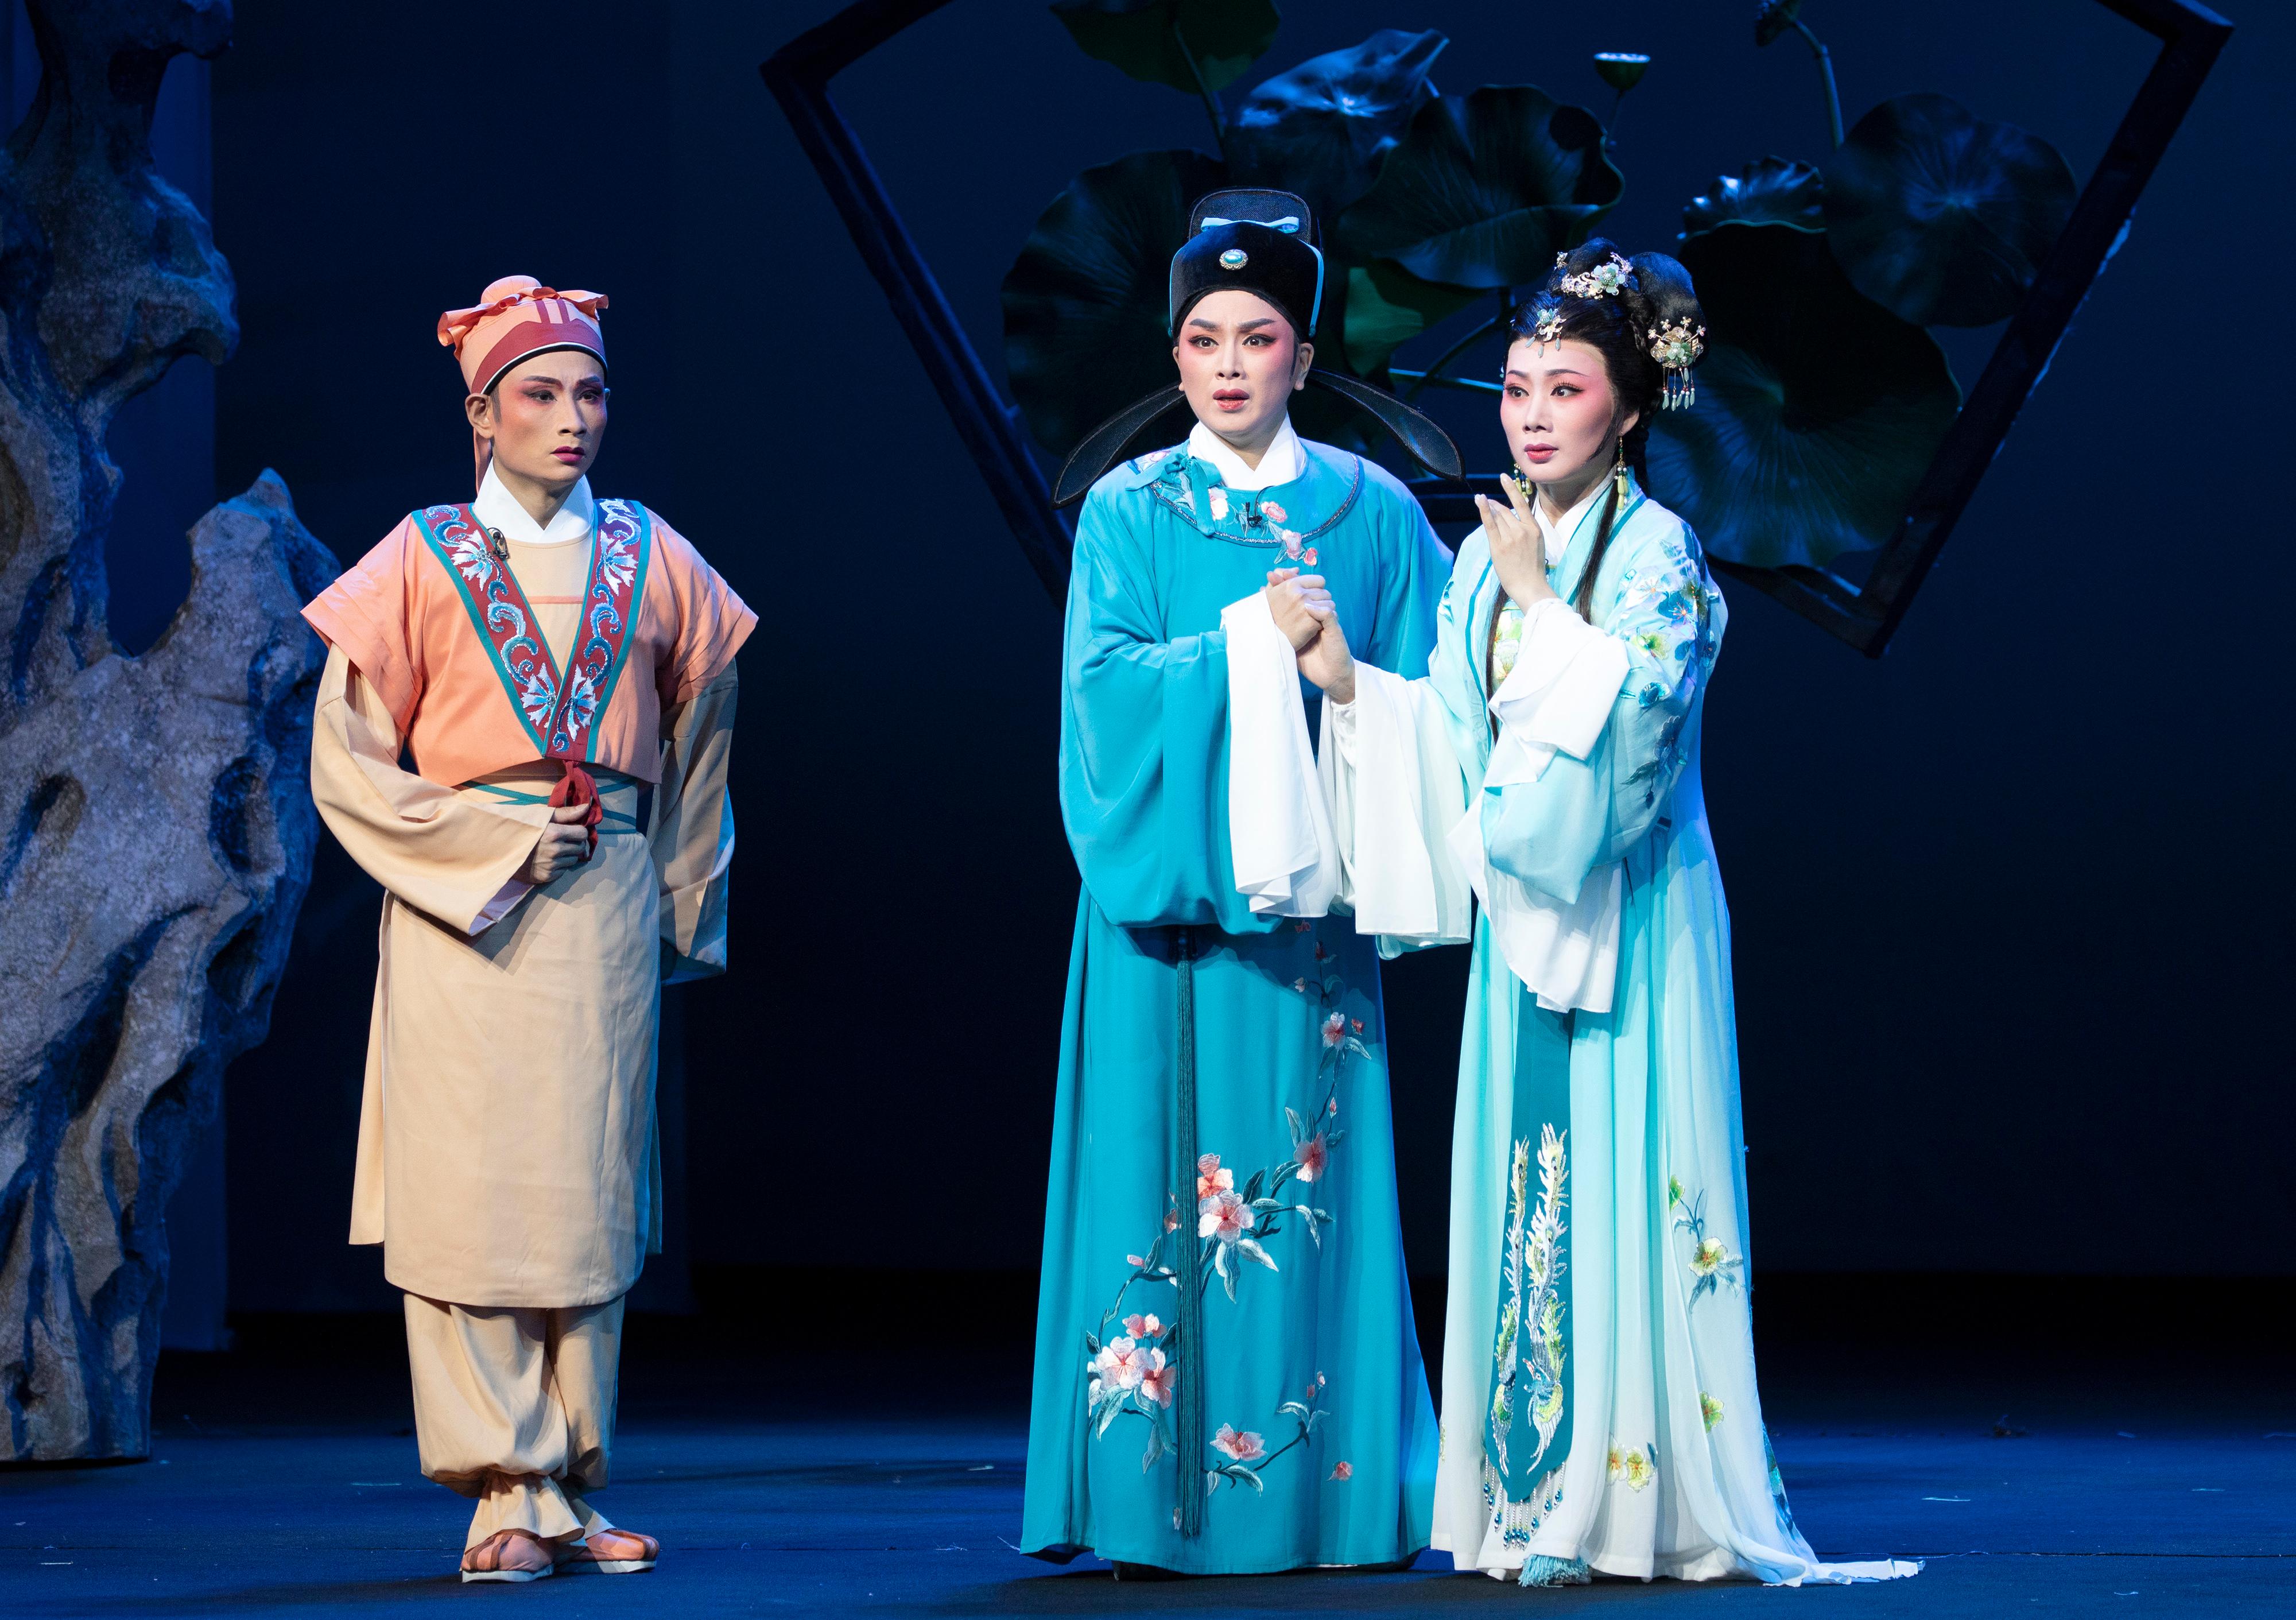 The Guangdong Chiu Chow Opera Theatre Number One Troupe and Sun Hon Kwong Chiu Chow Opera Troupe will collaborate for three captivating Chiuchow opera performances at the inaugural Chinese Culture Festival in late June. Photo shows a scene from "Poet Li Shangyin".